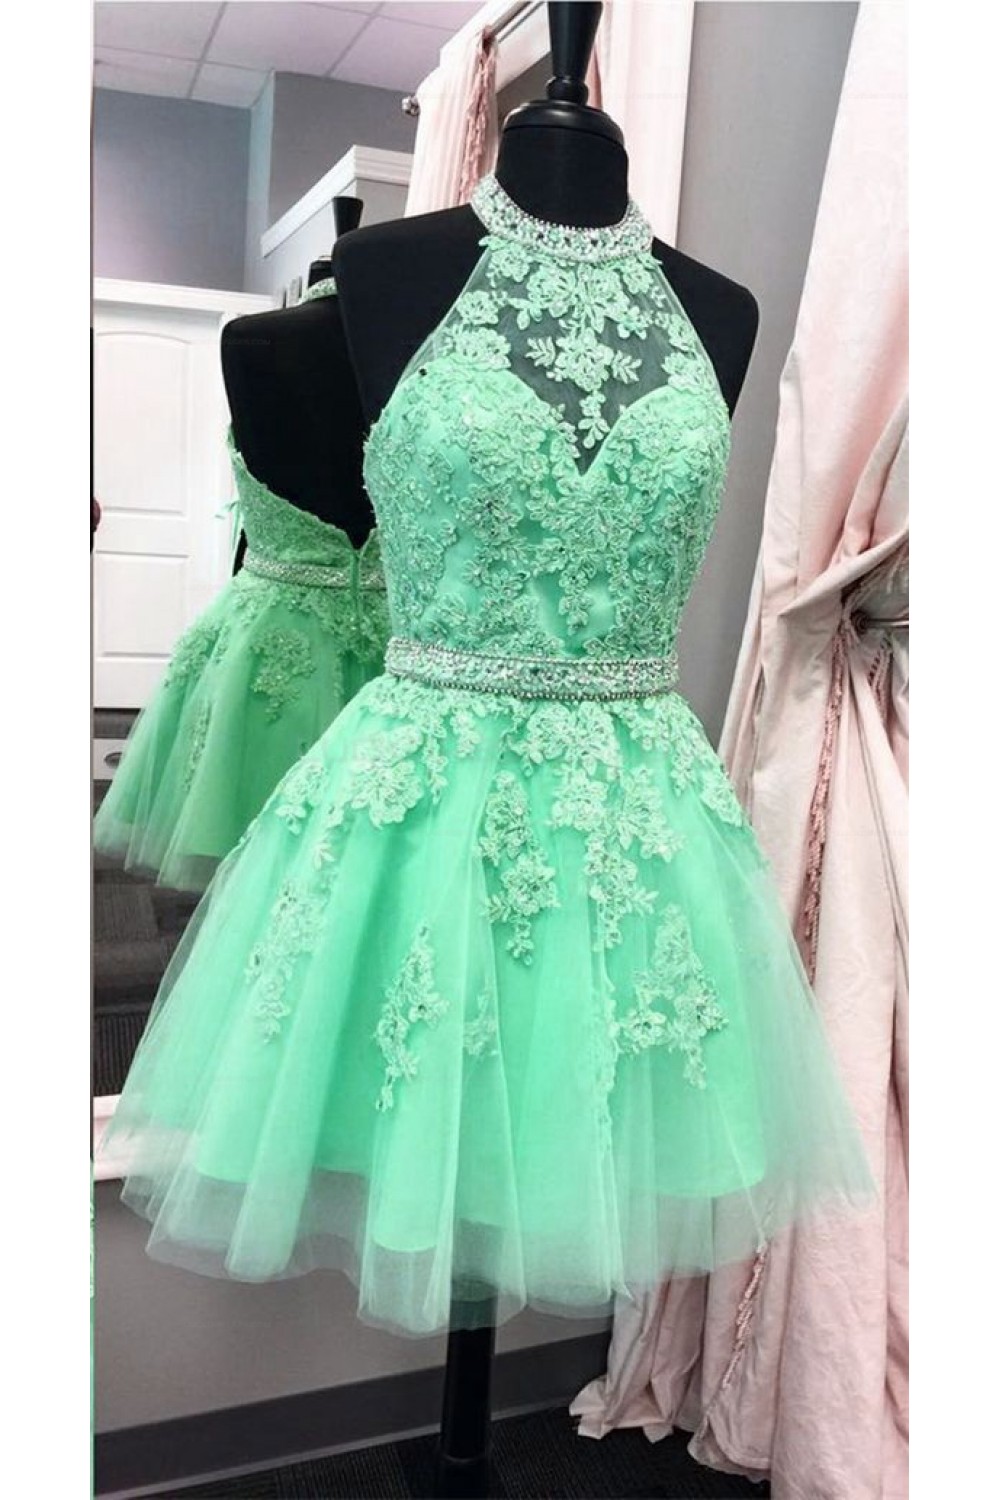 Halter Short Green Beaded Lace Prom Party Homecoming Graduation Dresses ...